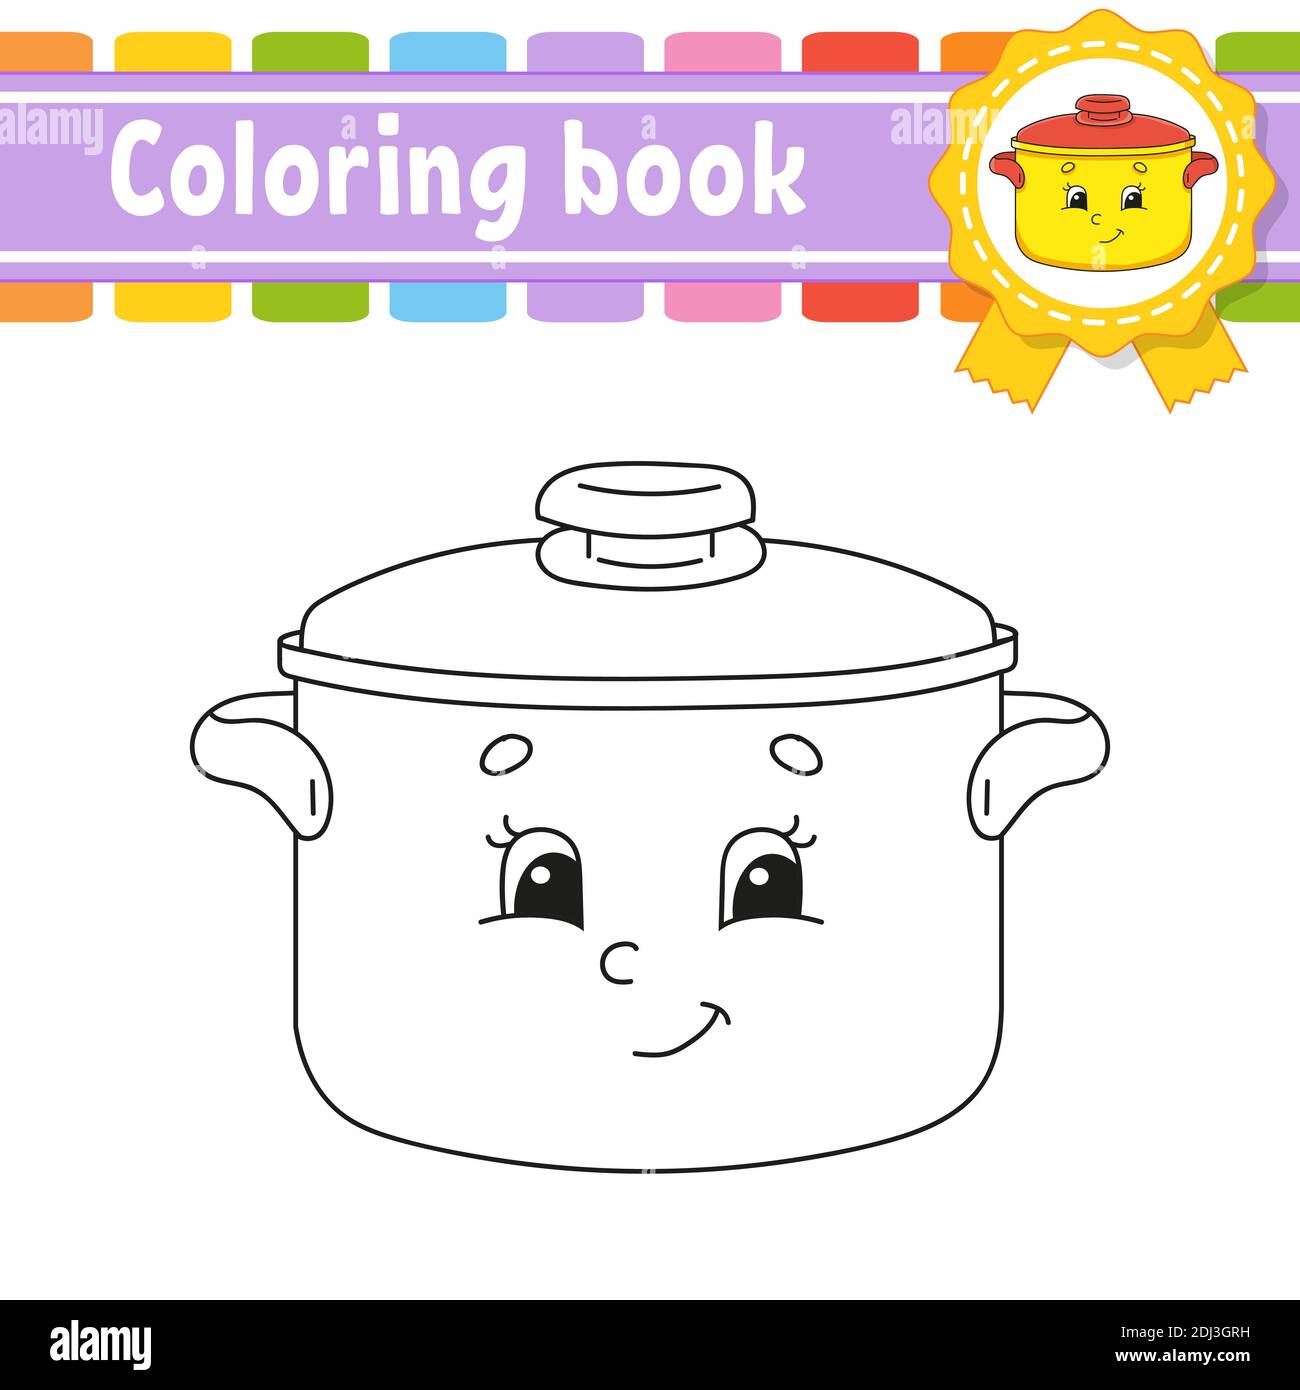 https://c8.alamy.com/comp/2DJ3GRH/coloring-book-for-kids-cheerful-character-vector-illustration-cute-cartoon-style-black-contour-silhouette-isolated-on-white-background-2DJ3GRH.jpg